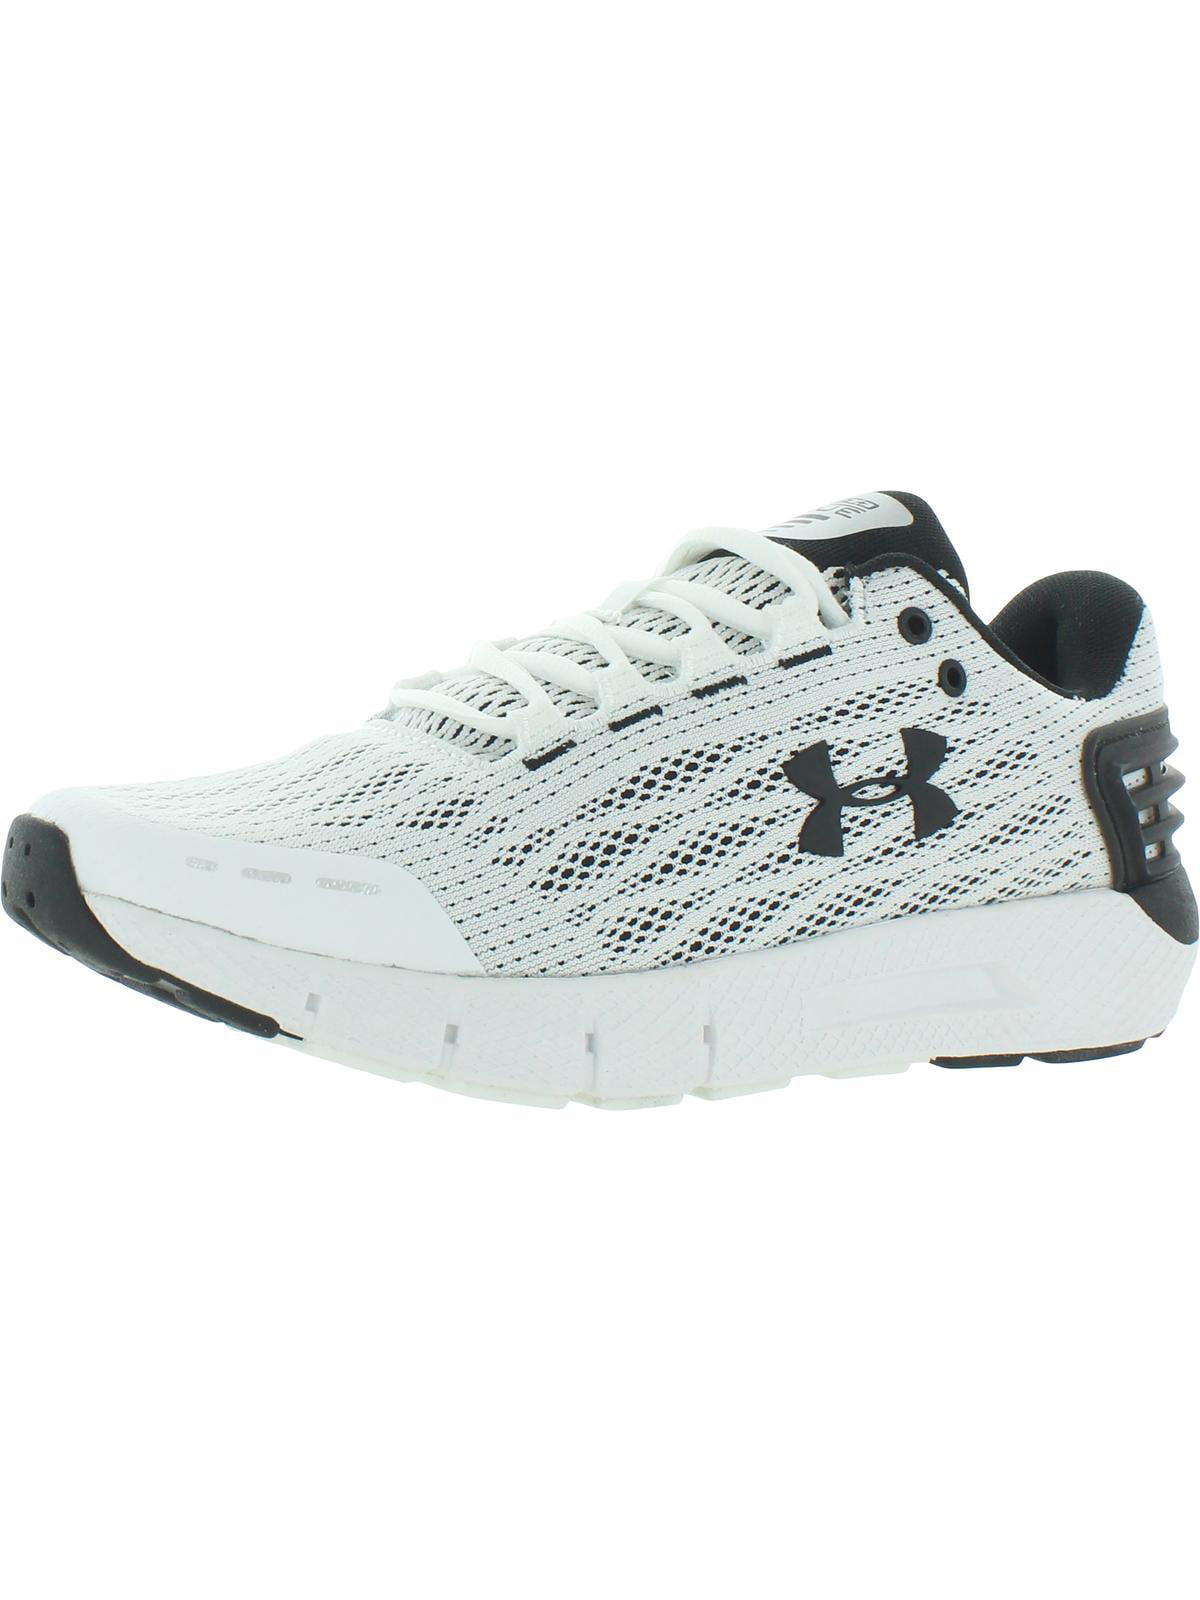 Under Armour Mens Charged Rogue Running Shoes Trainers Sneakers Black White 